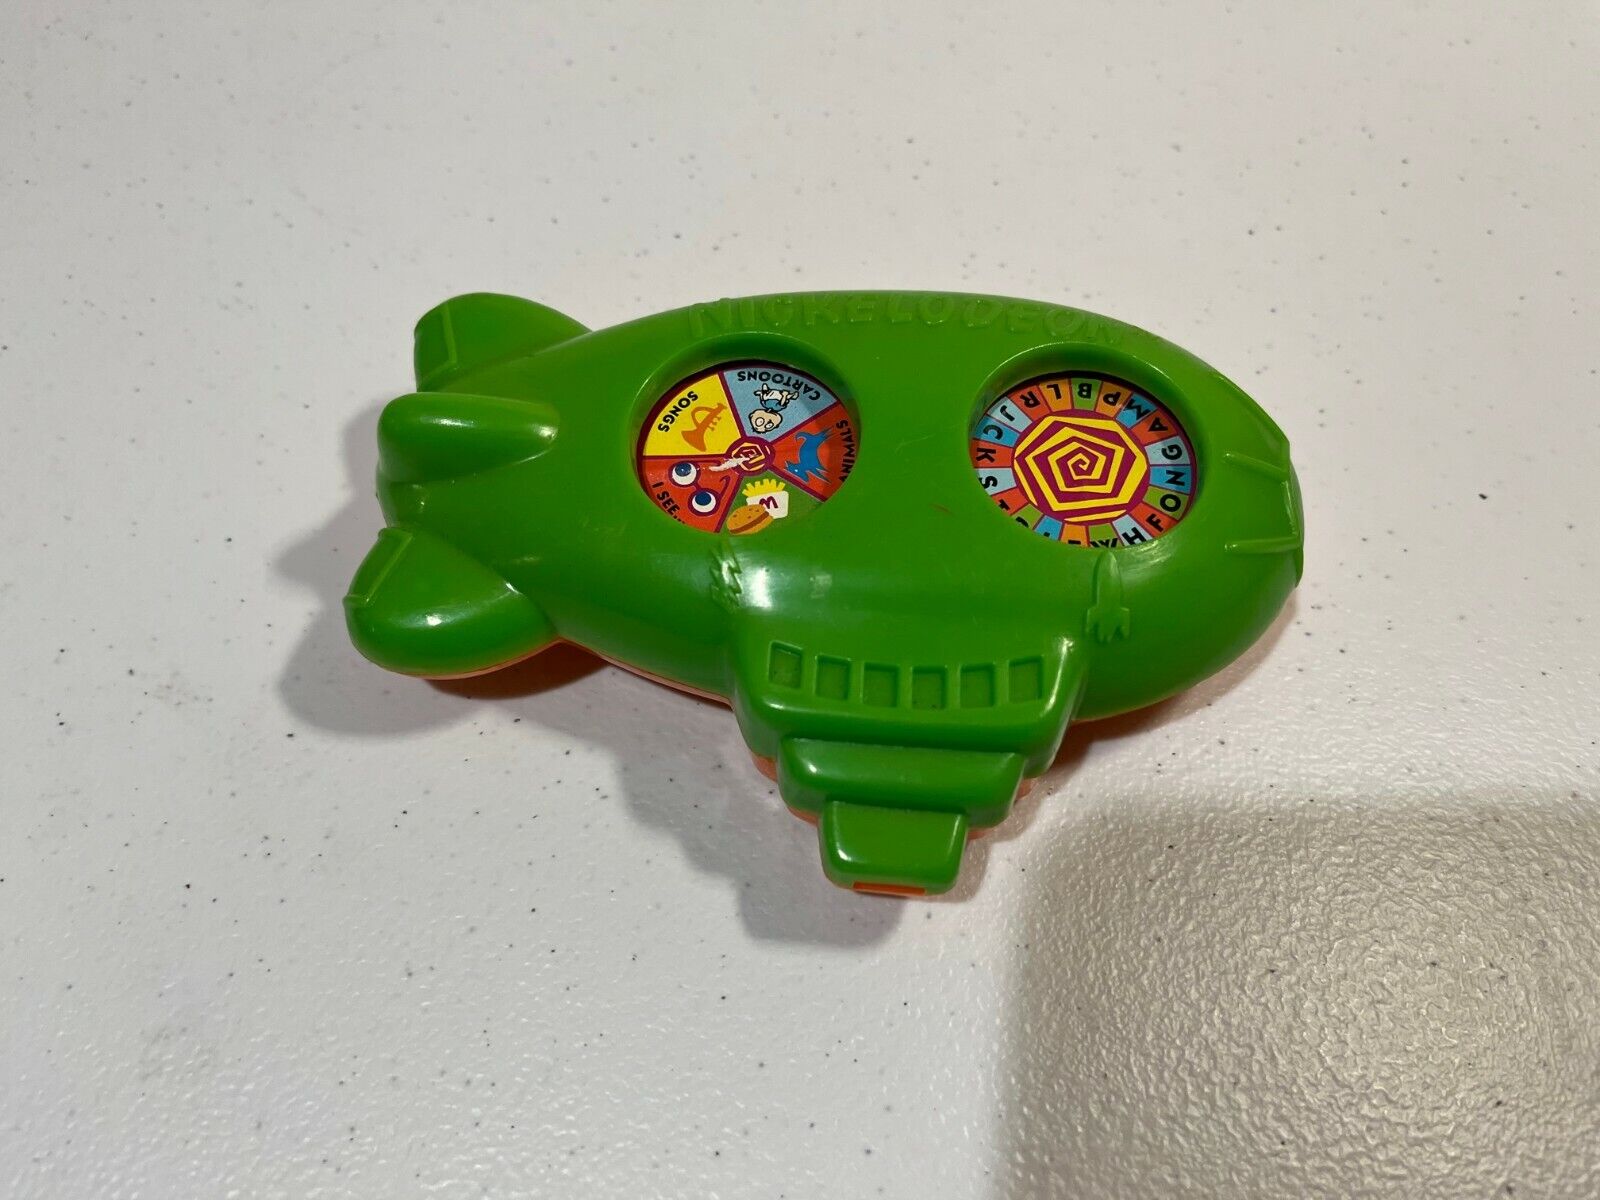 Vintage 1992 Mcdonald's Happy Meal Toy Nickelodeon Blimp Spinner Game